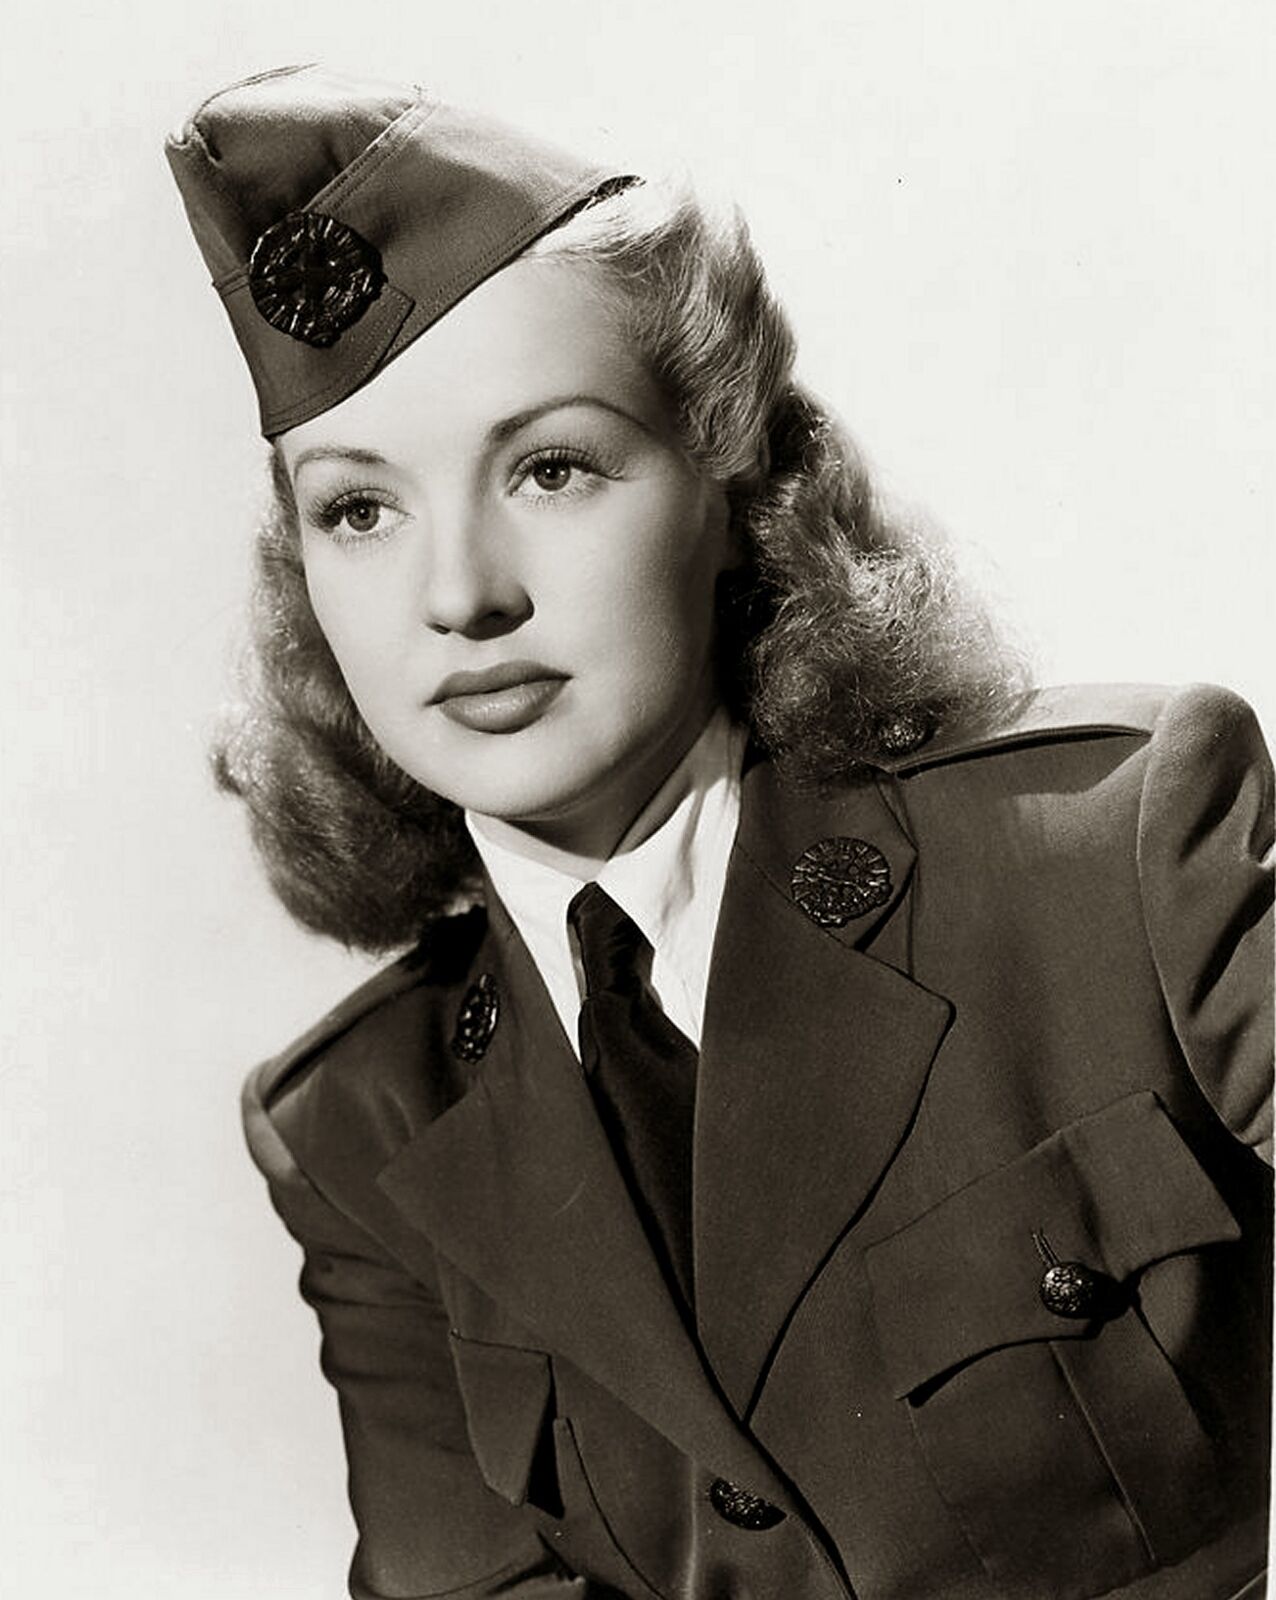 1941 BETTY GRABLE From A YANK IN THE RAF Photo (198-C )